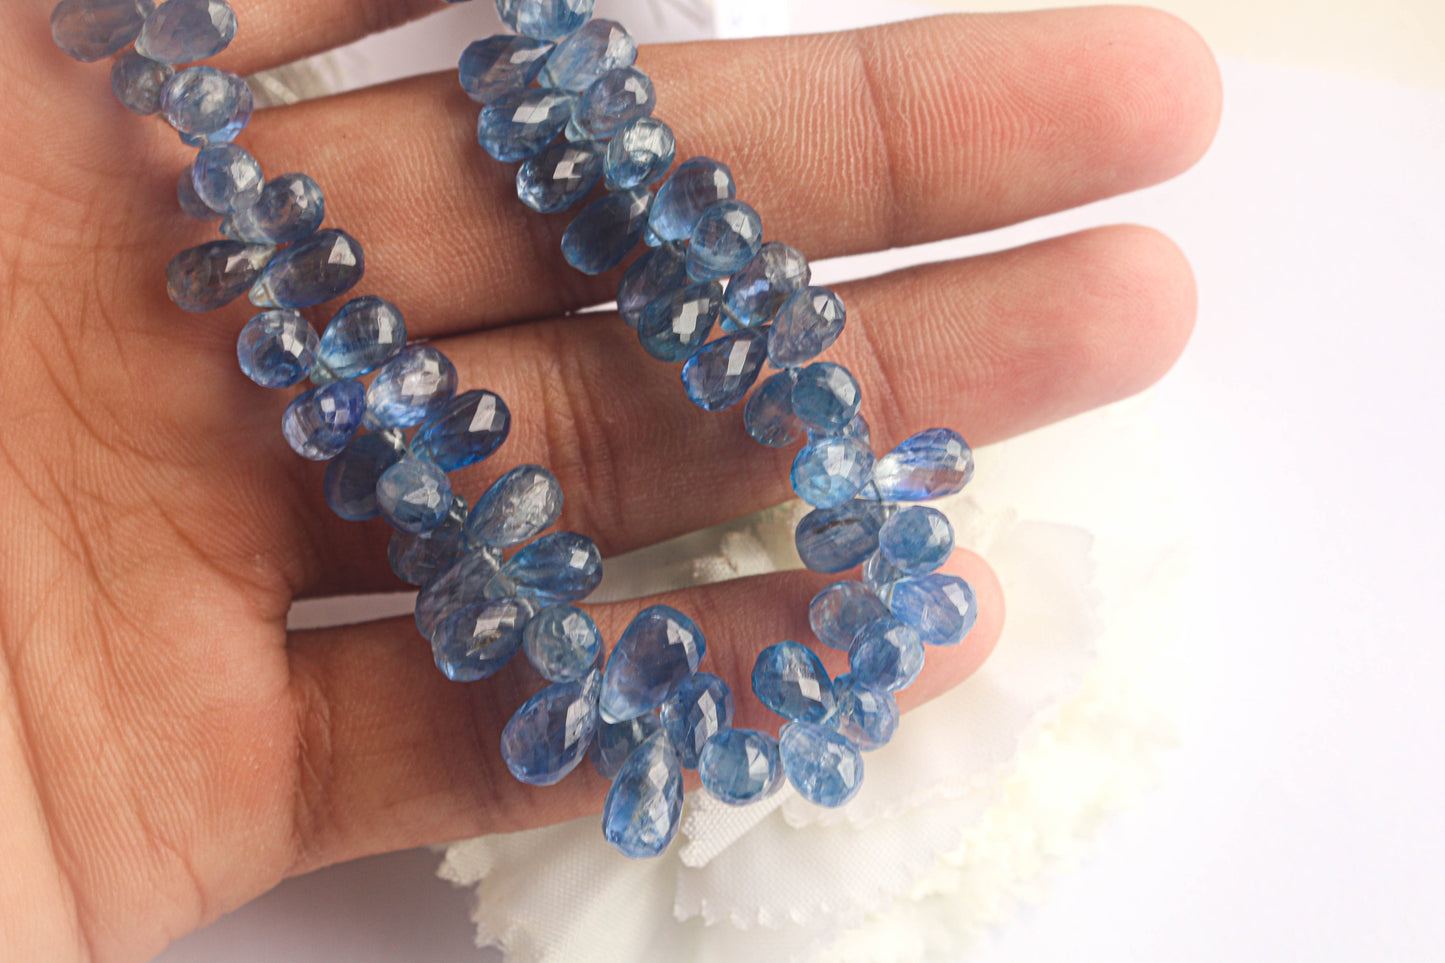 Kyanite Faceted Drop Shape | 4x7mm | 95 Pieces Full Strand | 9 Inch | Natural Good Quality Kyanite | Beadsforyourjewellery Beadsforyourjewelry